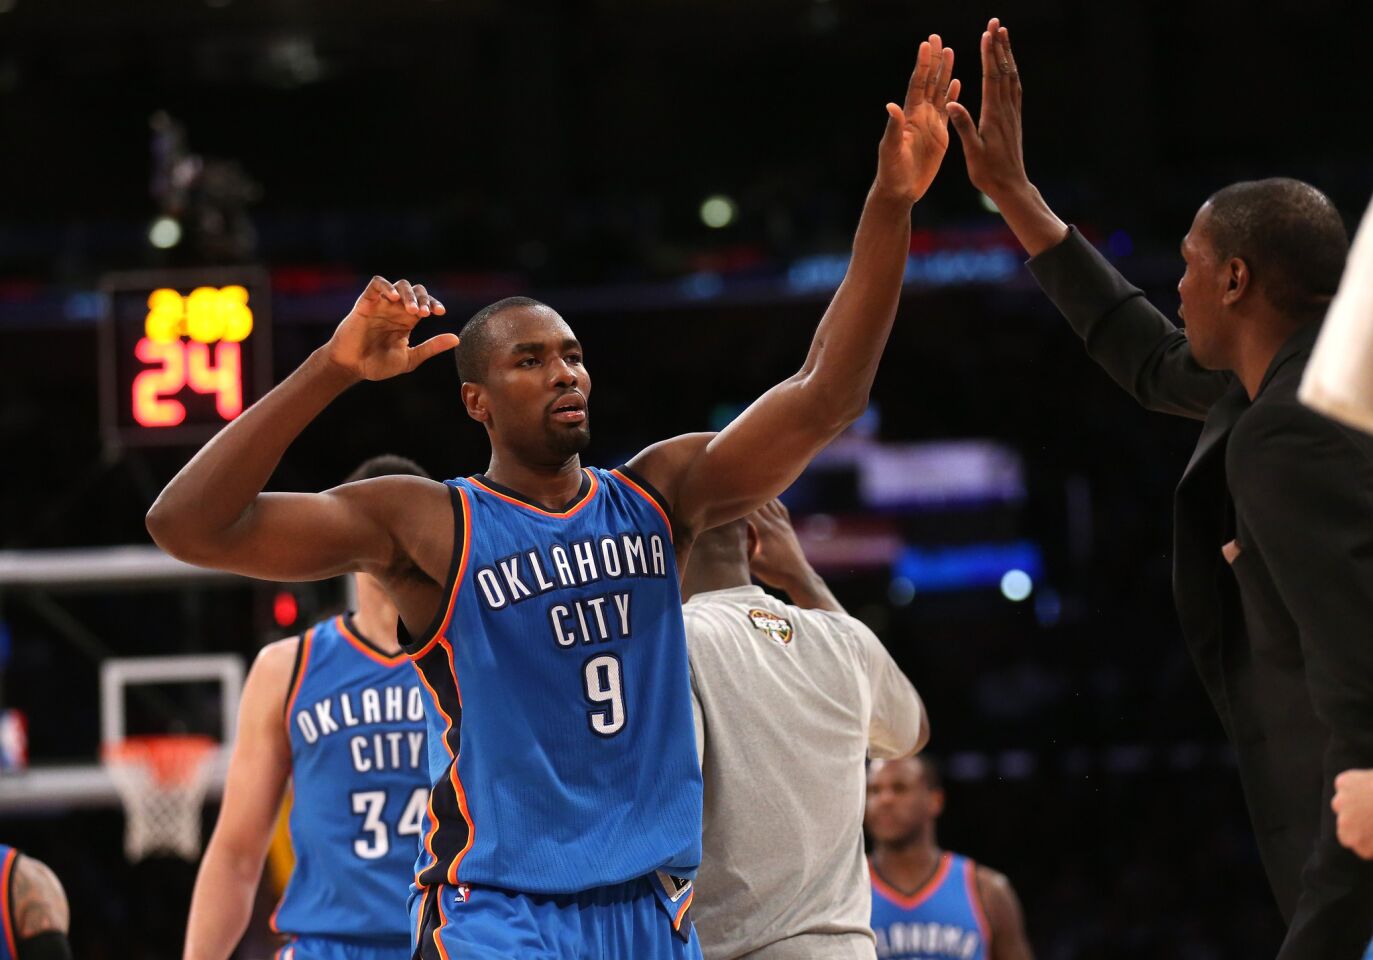 Thunder power forward Serge Ibaka is greeted with a high five by injured teammate Kevin Durant in the fourth quarter of the Thunder's win over the Lakers.